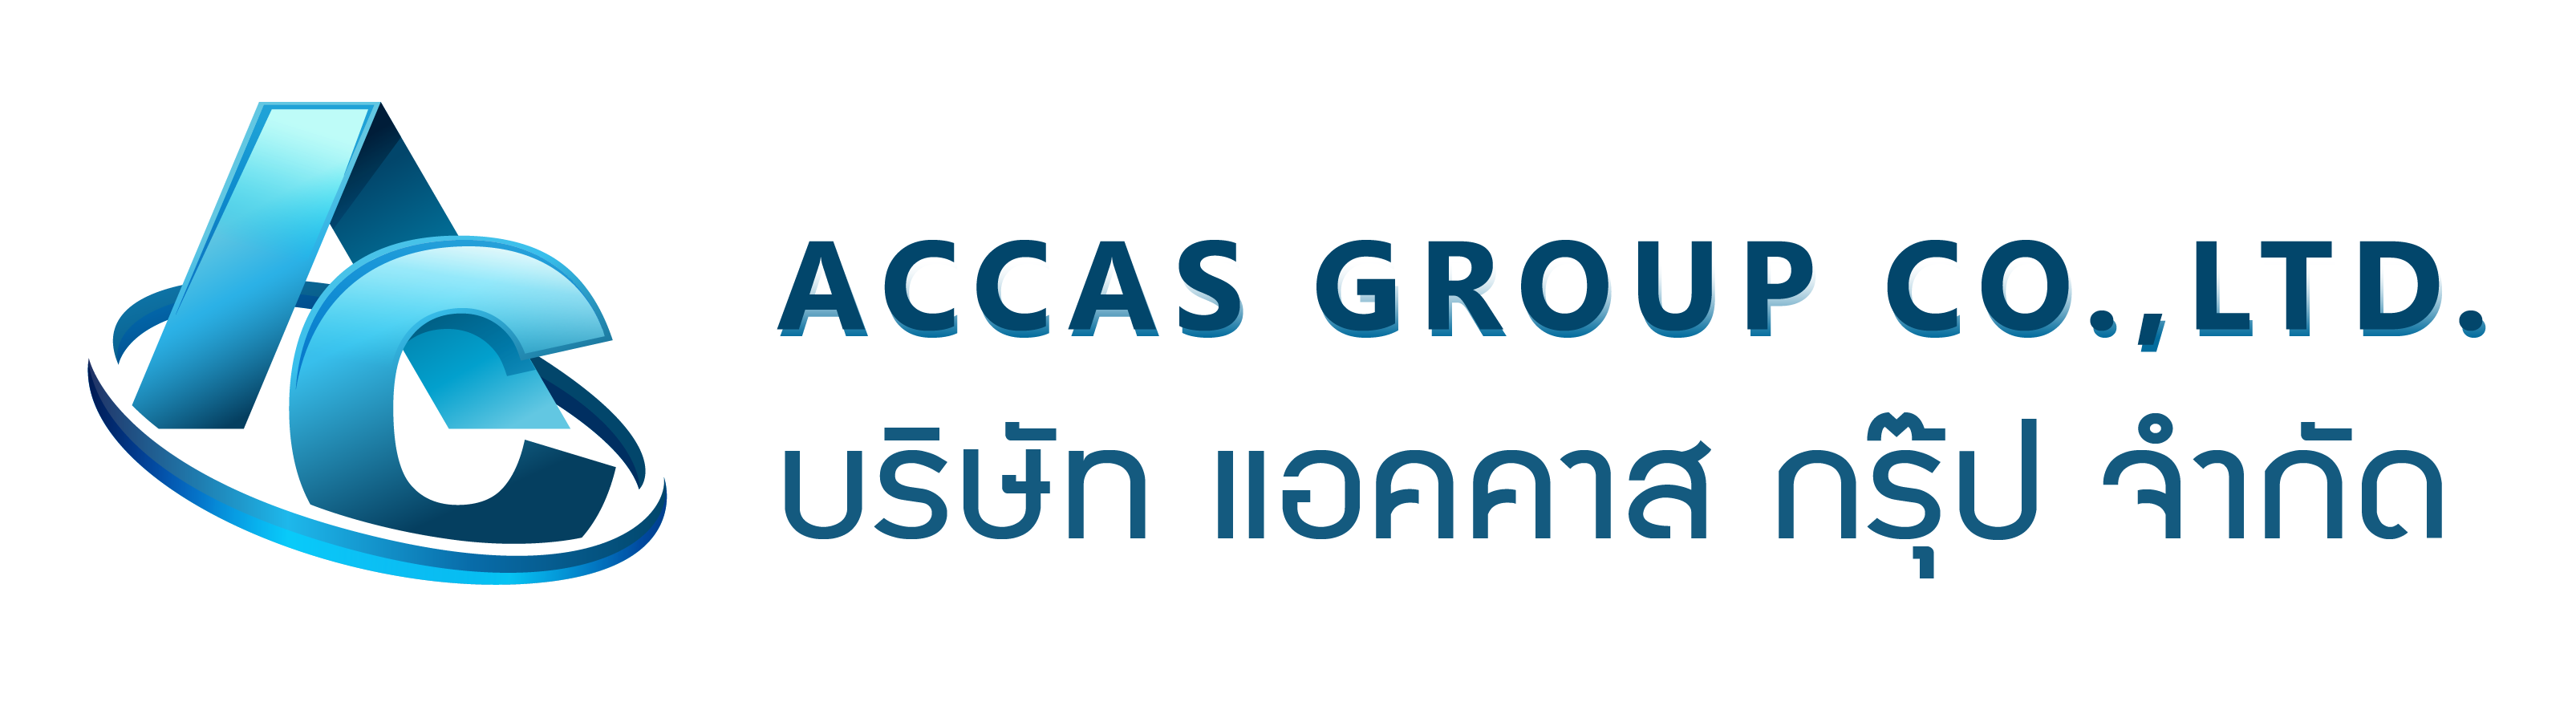 ACCAS GROUP Co., Ltd.